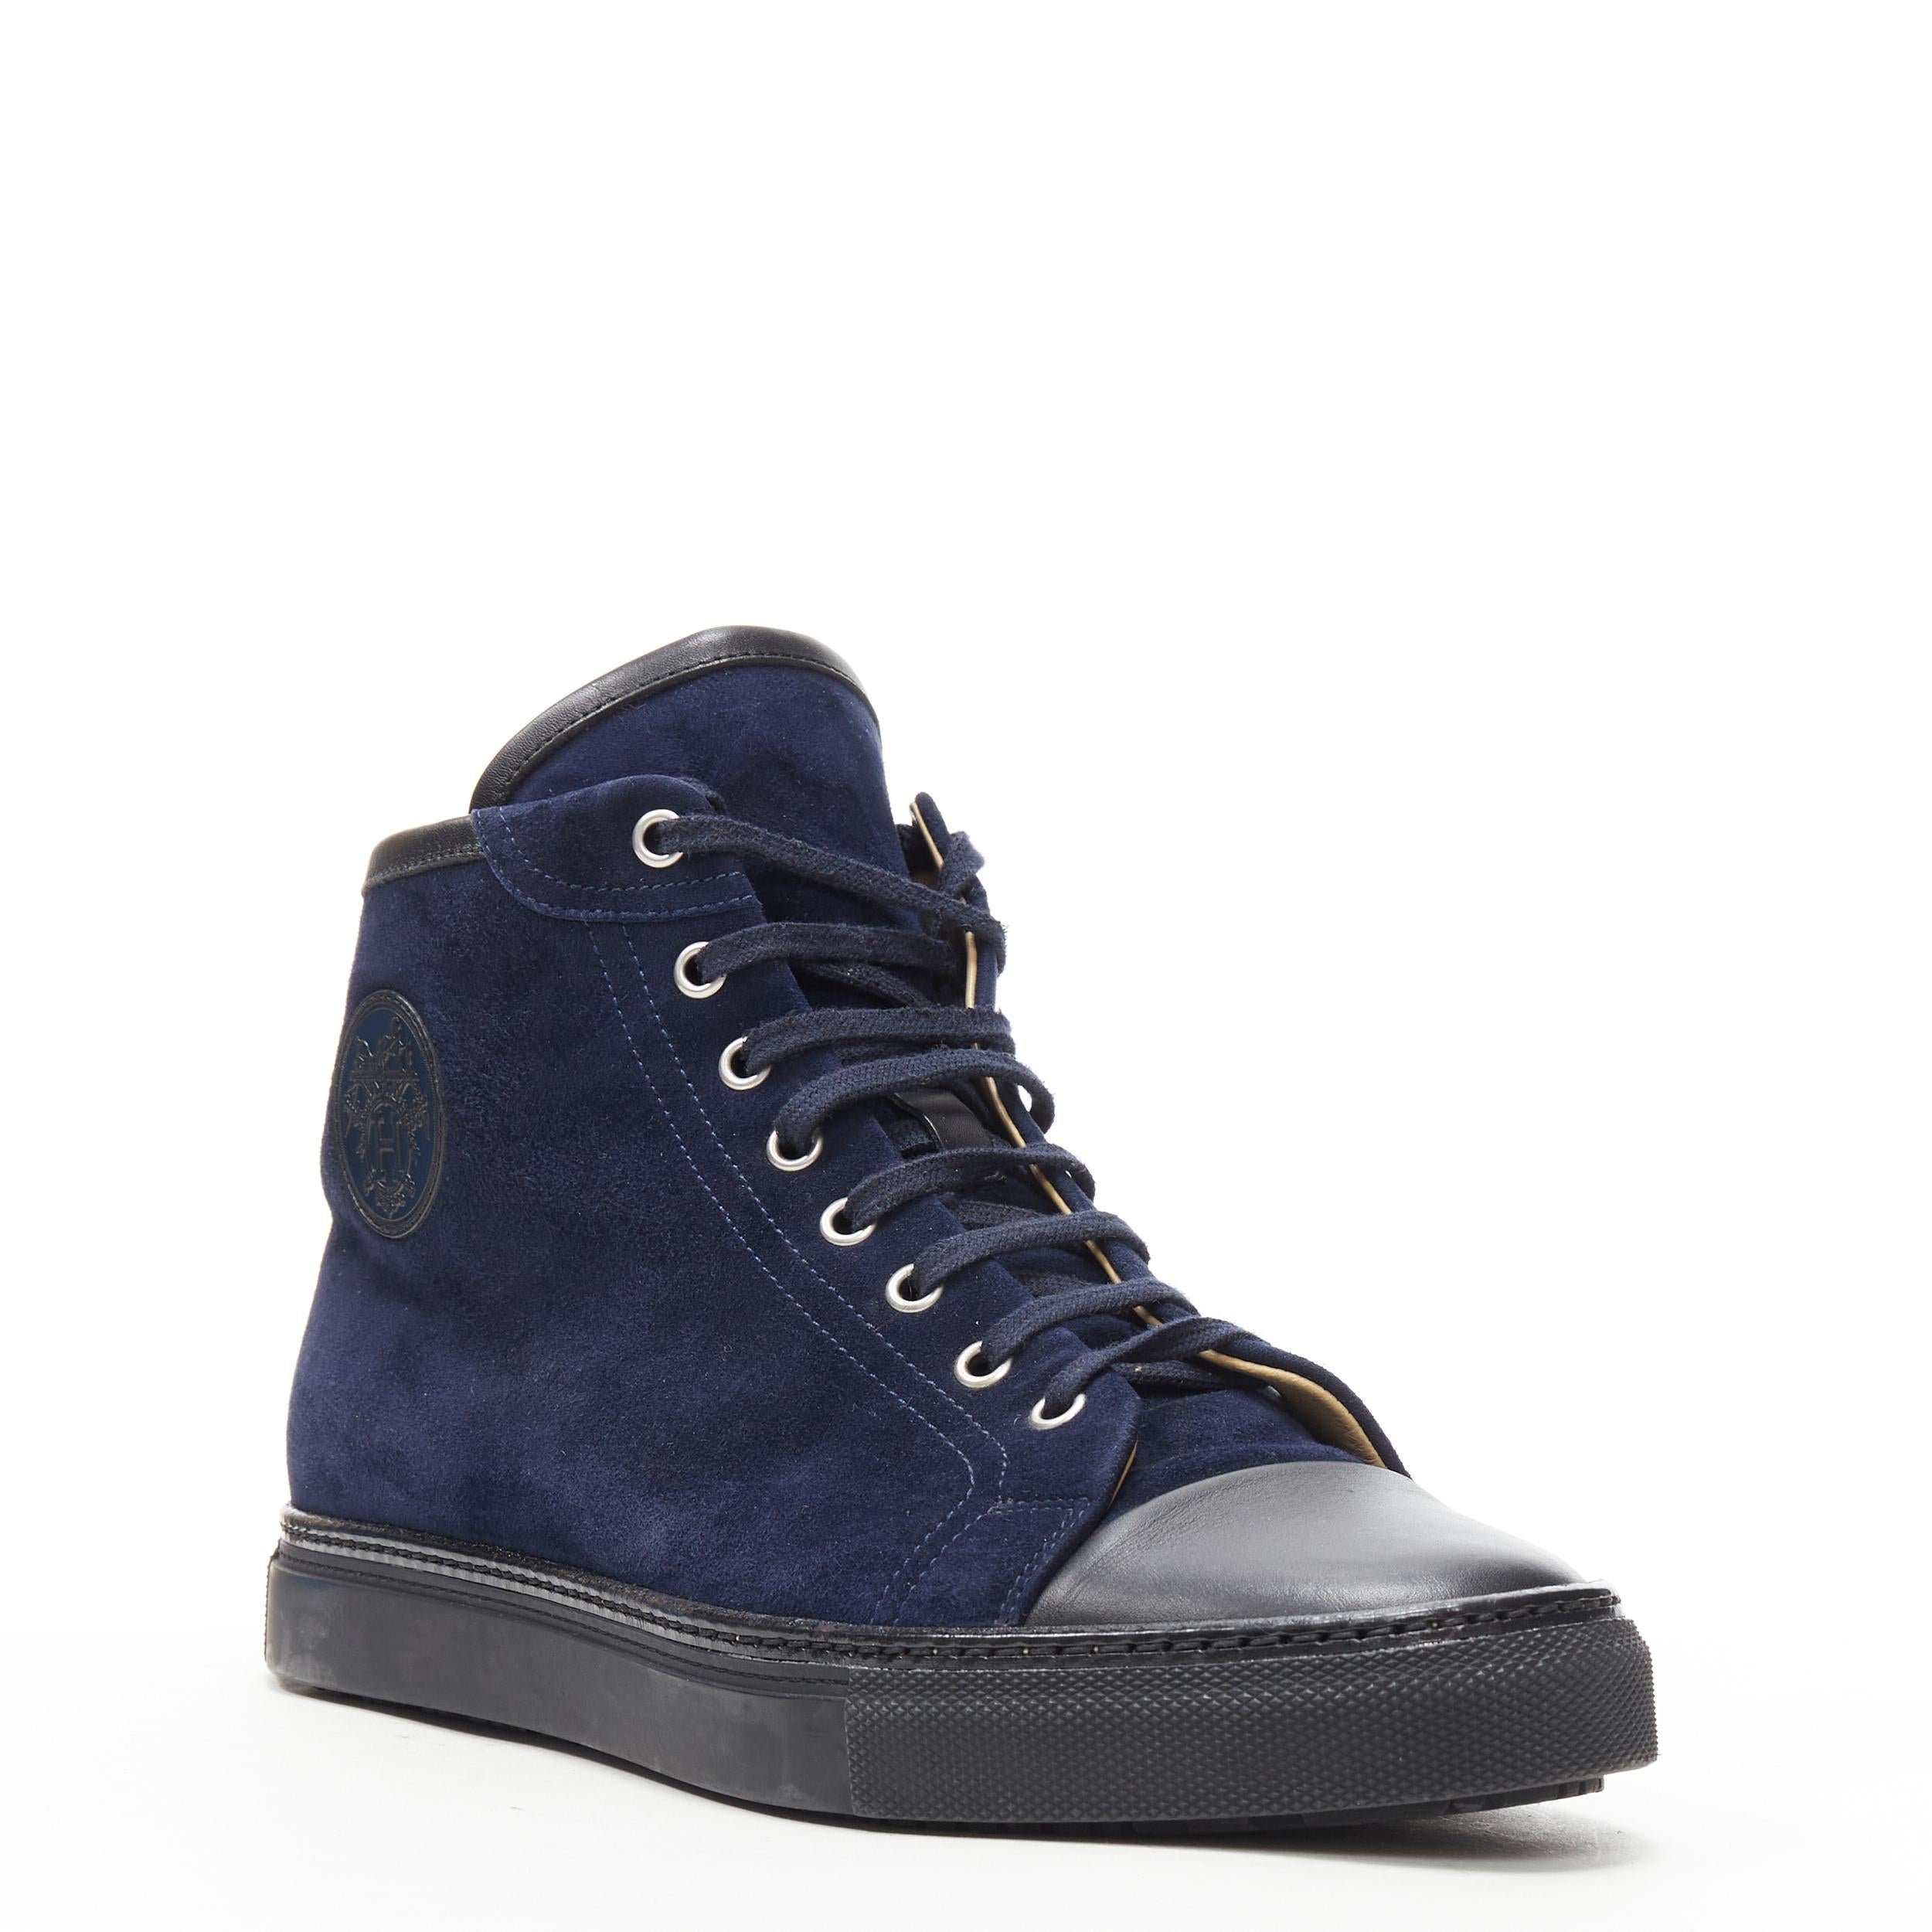 HERMES Jimmy navy blue suede H logo stamp high top sneakers EU41 
Reference: TGAS/B00982 
Brand: Hermes 
Model: Jimmy high top 
Material: Suede 
Color: Navy 
Pattern: Solid 
Closure: Lace Up 
Extra Detail: Jimmy high top. Navy suede with black